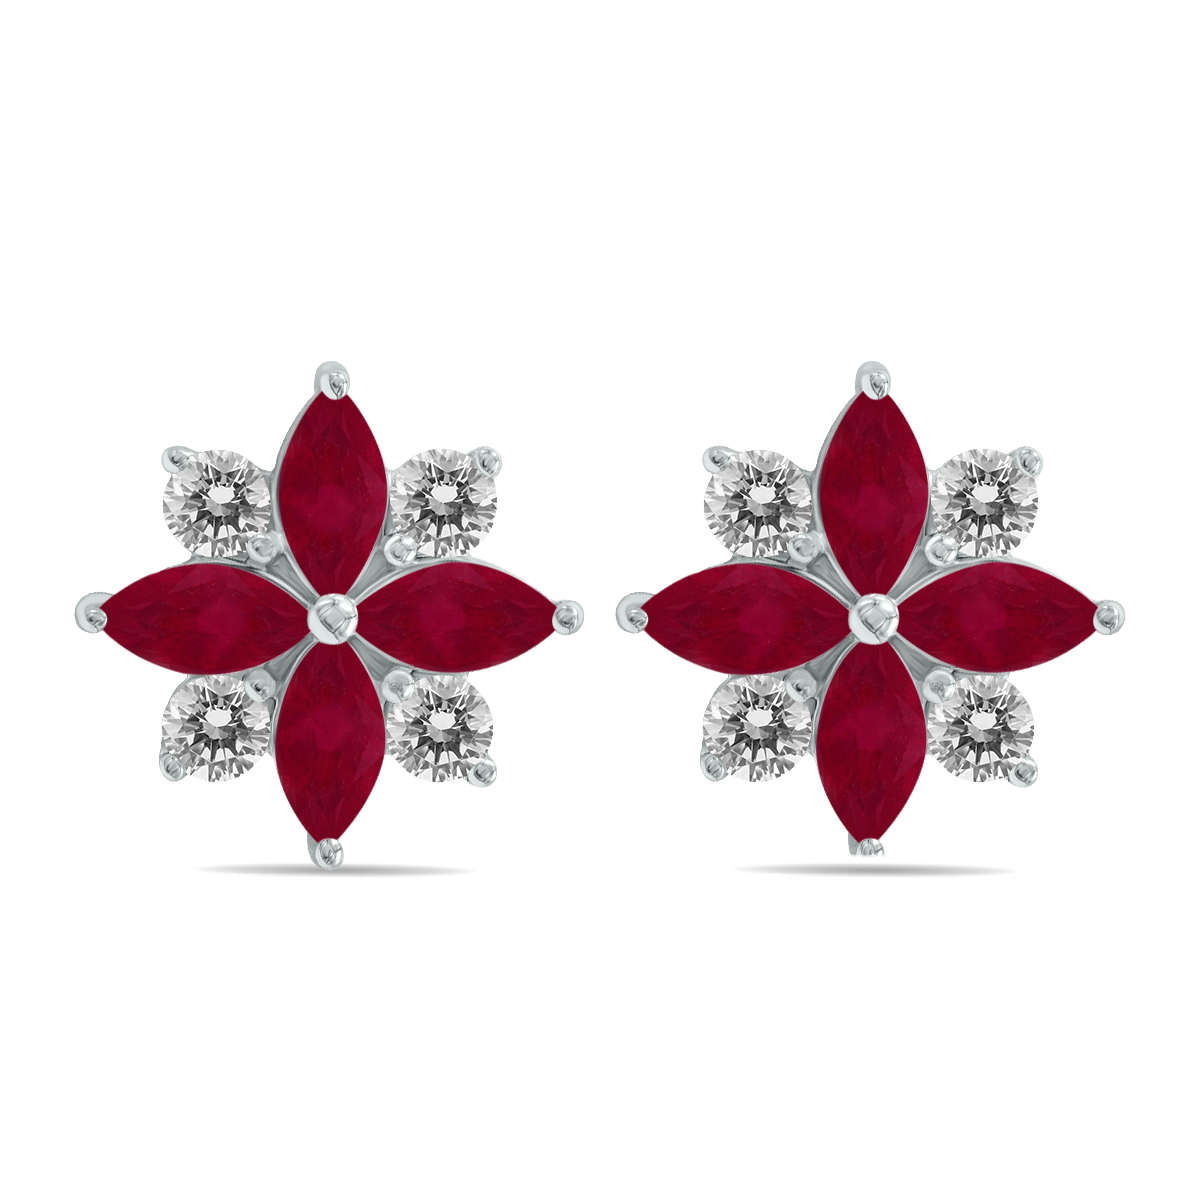 Image of 1 Carat TW Ruby and Diamond Flower Earrings in 10K White Gold